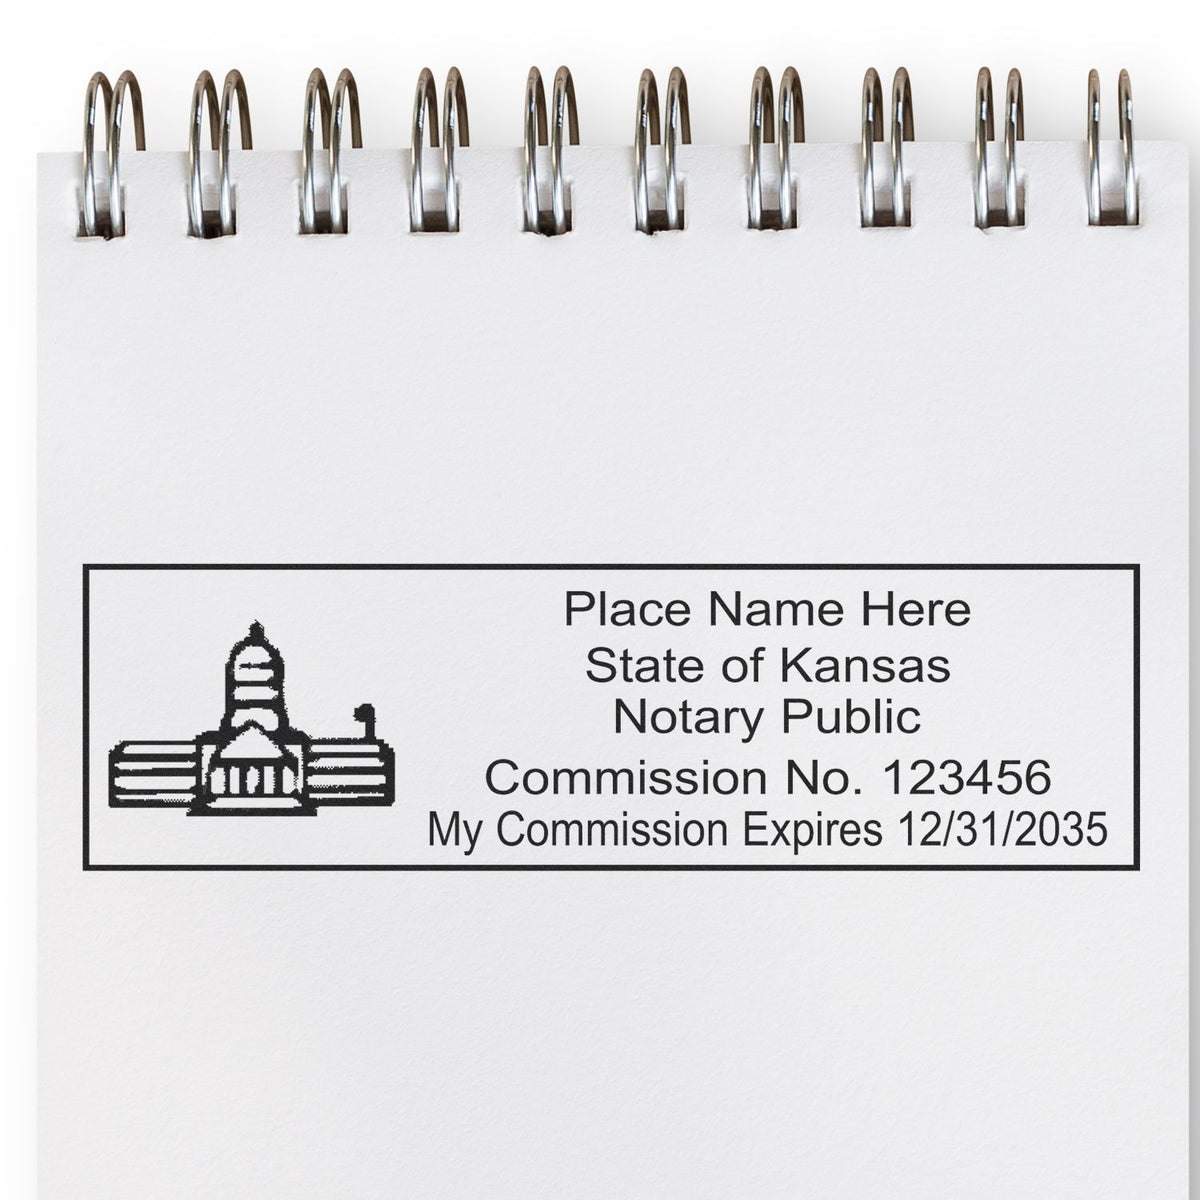 A stamped impression of the Slim Pre-Inked State Seal Notary Stamp for Kansas in this stylish lifestyle photo, setting the tone for a unique and personalized product.